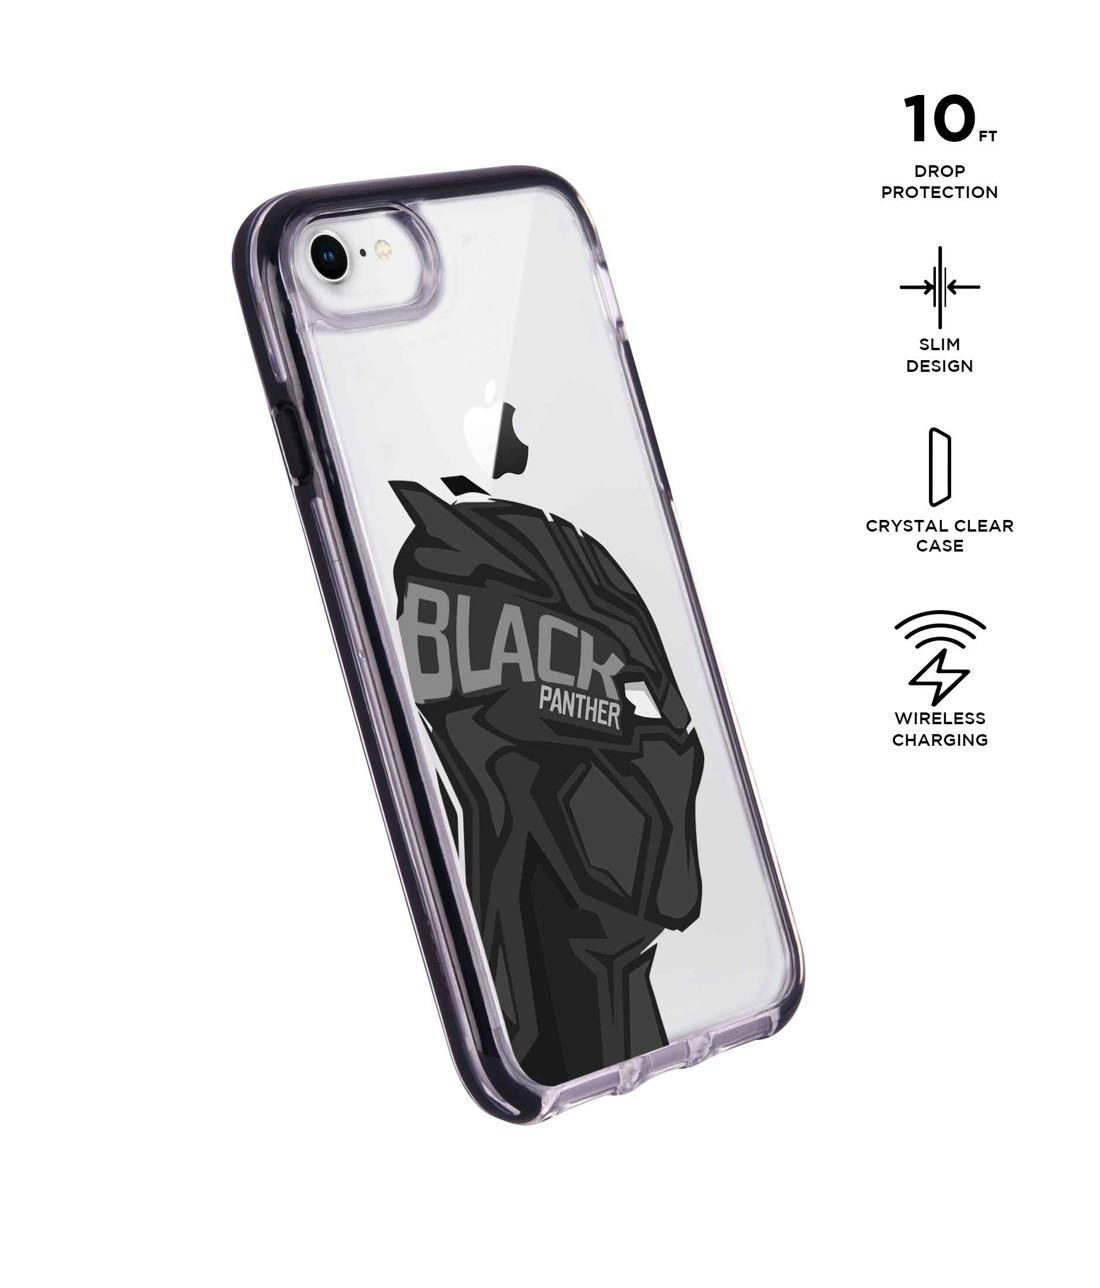 Black Panther Art - Extreme Phone Case for iPhone 8